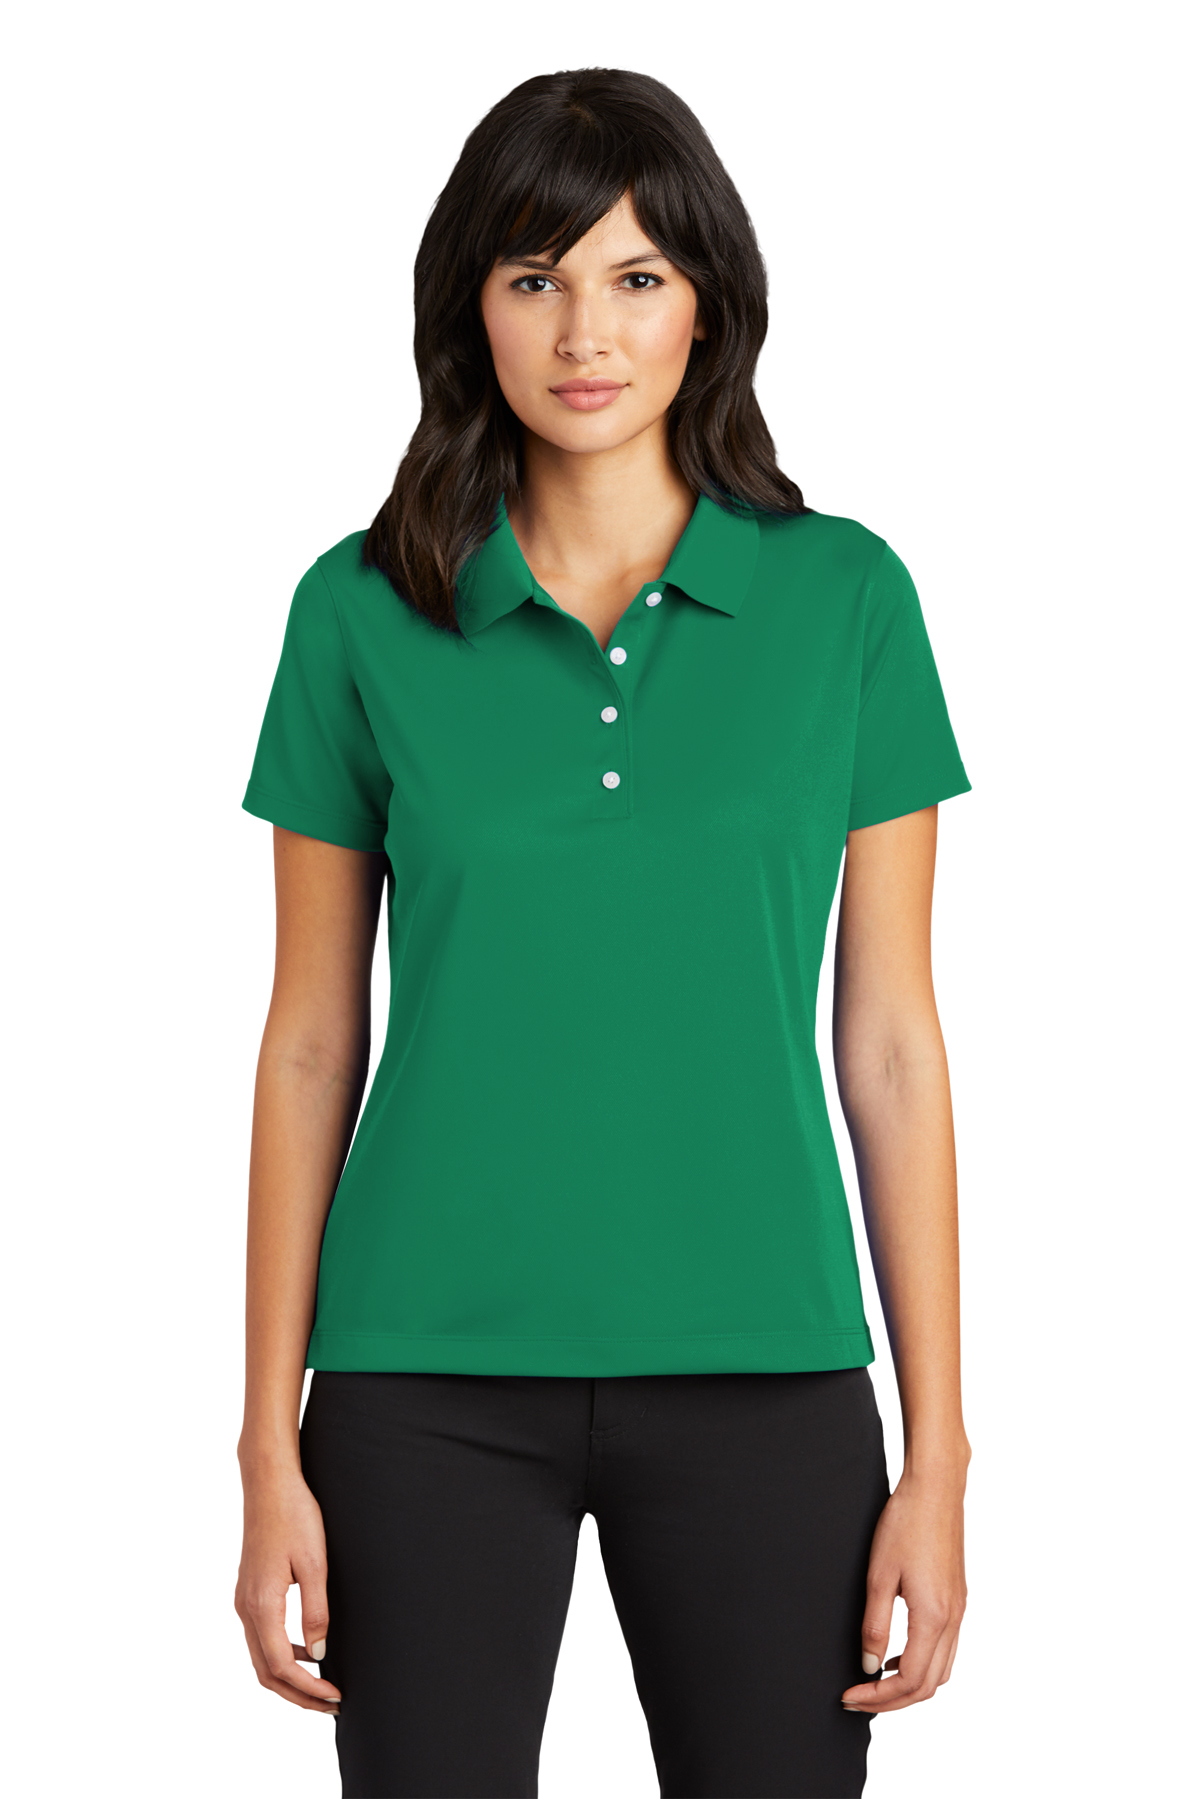 Nike Ladies Tech Basic Dri-FIT Polo | Product | Company Casuals